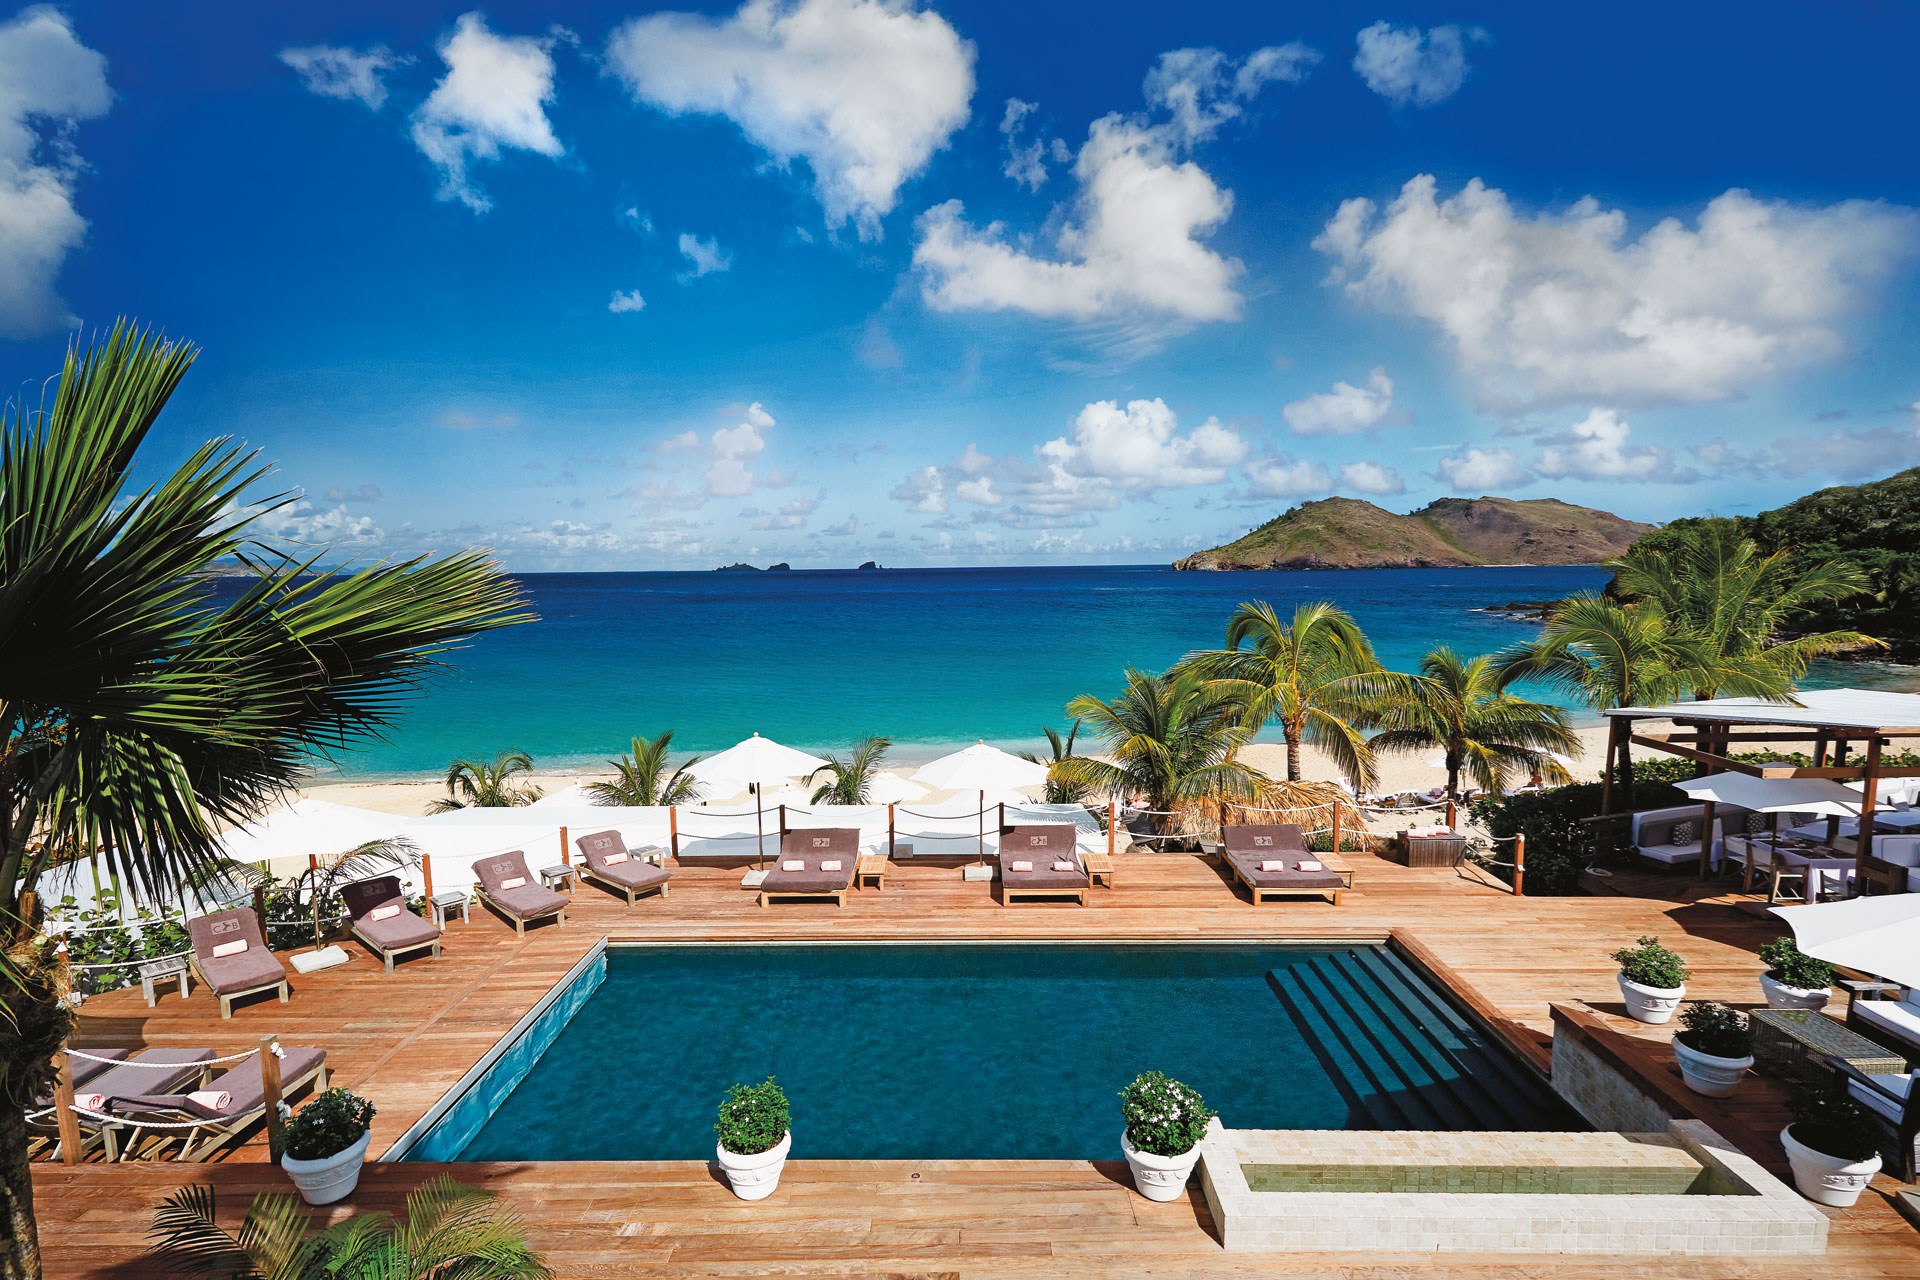 image<strong>header__cycling-in-provence-the-perfect-holiday-for-scenic-explorers</strong>poolside-at-cheval-blanc-st-barth-isle-de-france-conde-nast-traveller-9jan15-pierre-carreau-0jpg